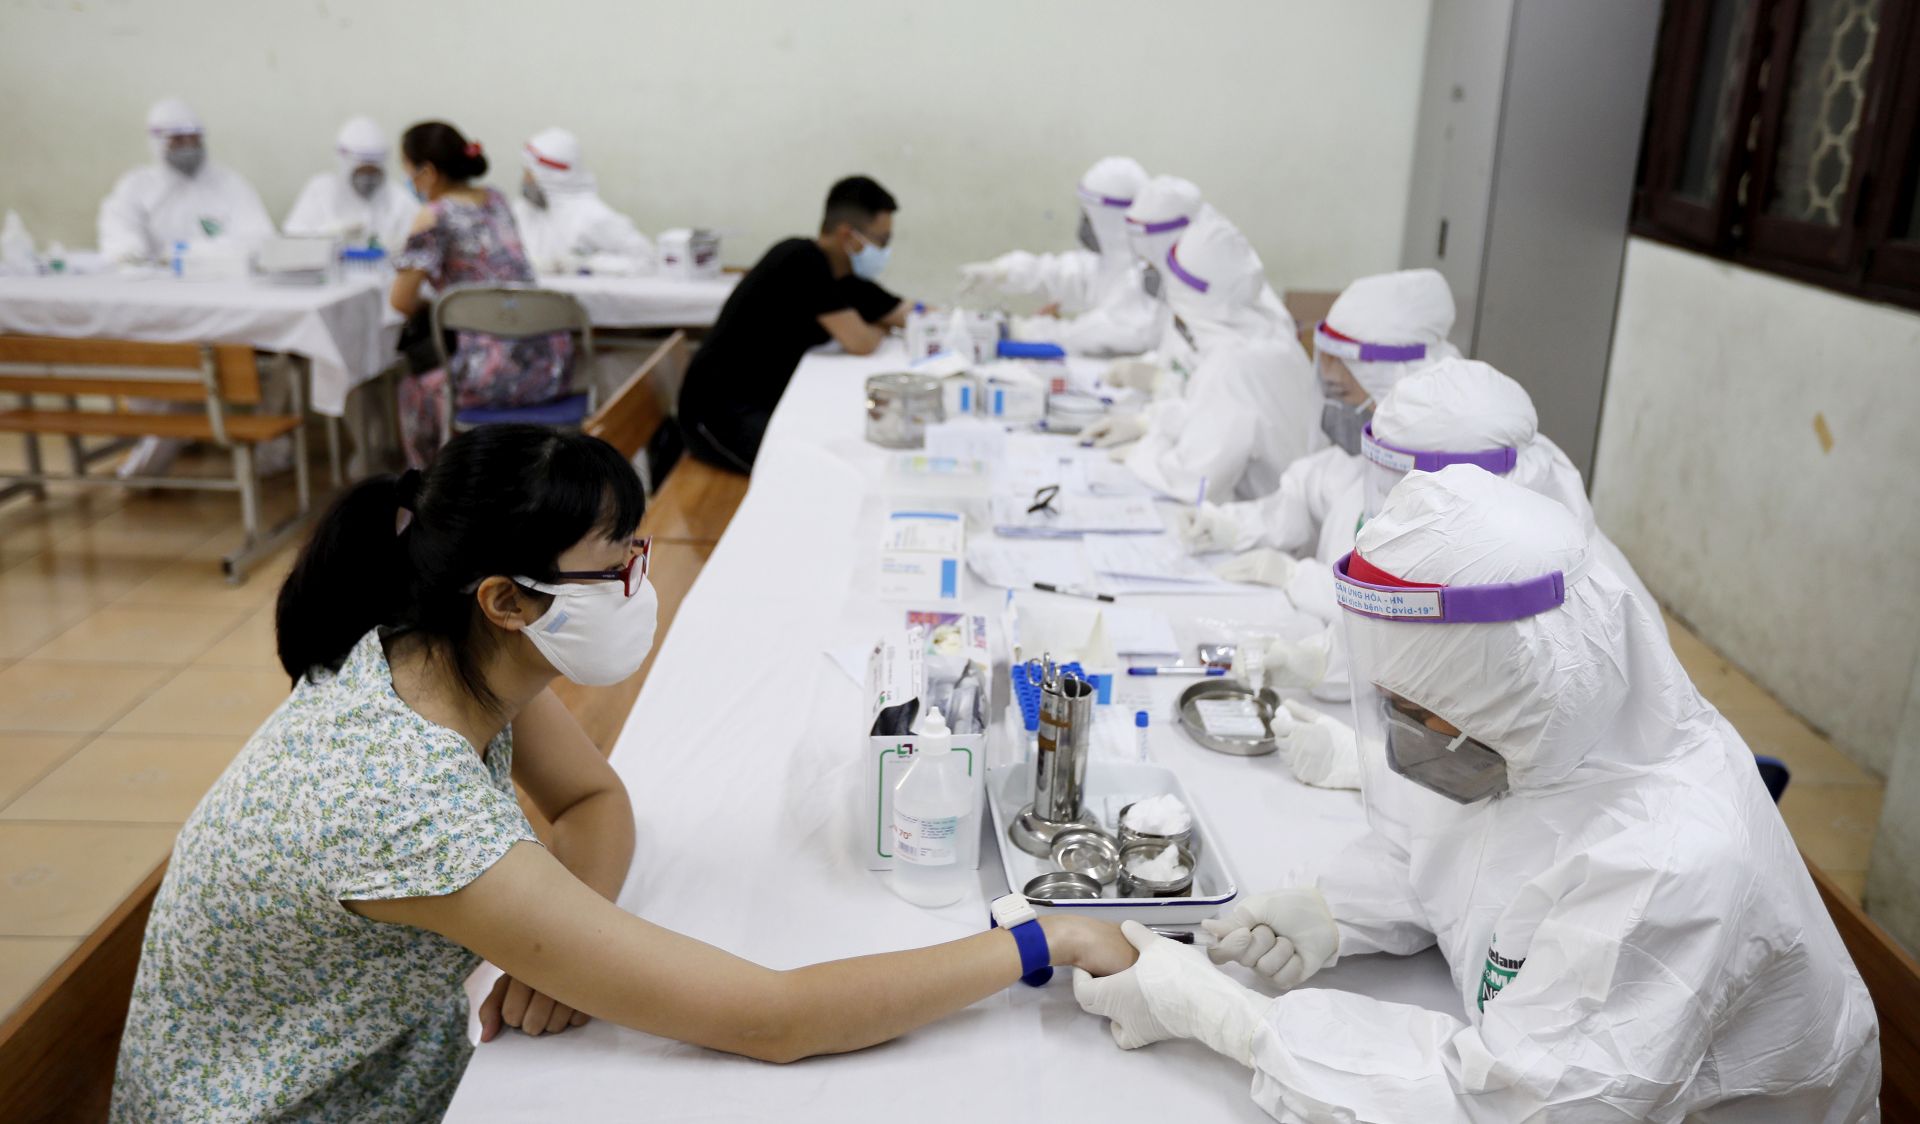 epa08575765 A woman who returned from Da Nang city has her blood tested at a makeshift rapid testing centre for coronavirus disease (COVID-19) in Hanoi, Vietnam 31 July 2020. The country reported on 31 July 45 new cases of infection, its biggest single-day jump since the beginning of the pandemic.  EPA/LUONG THAI LINH